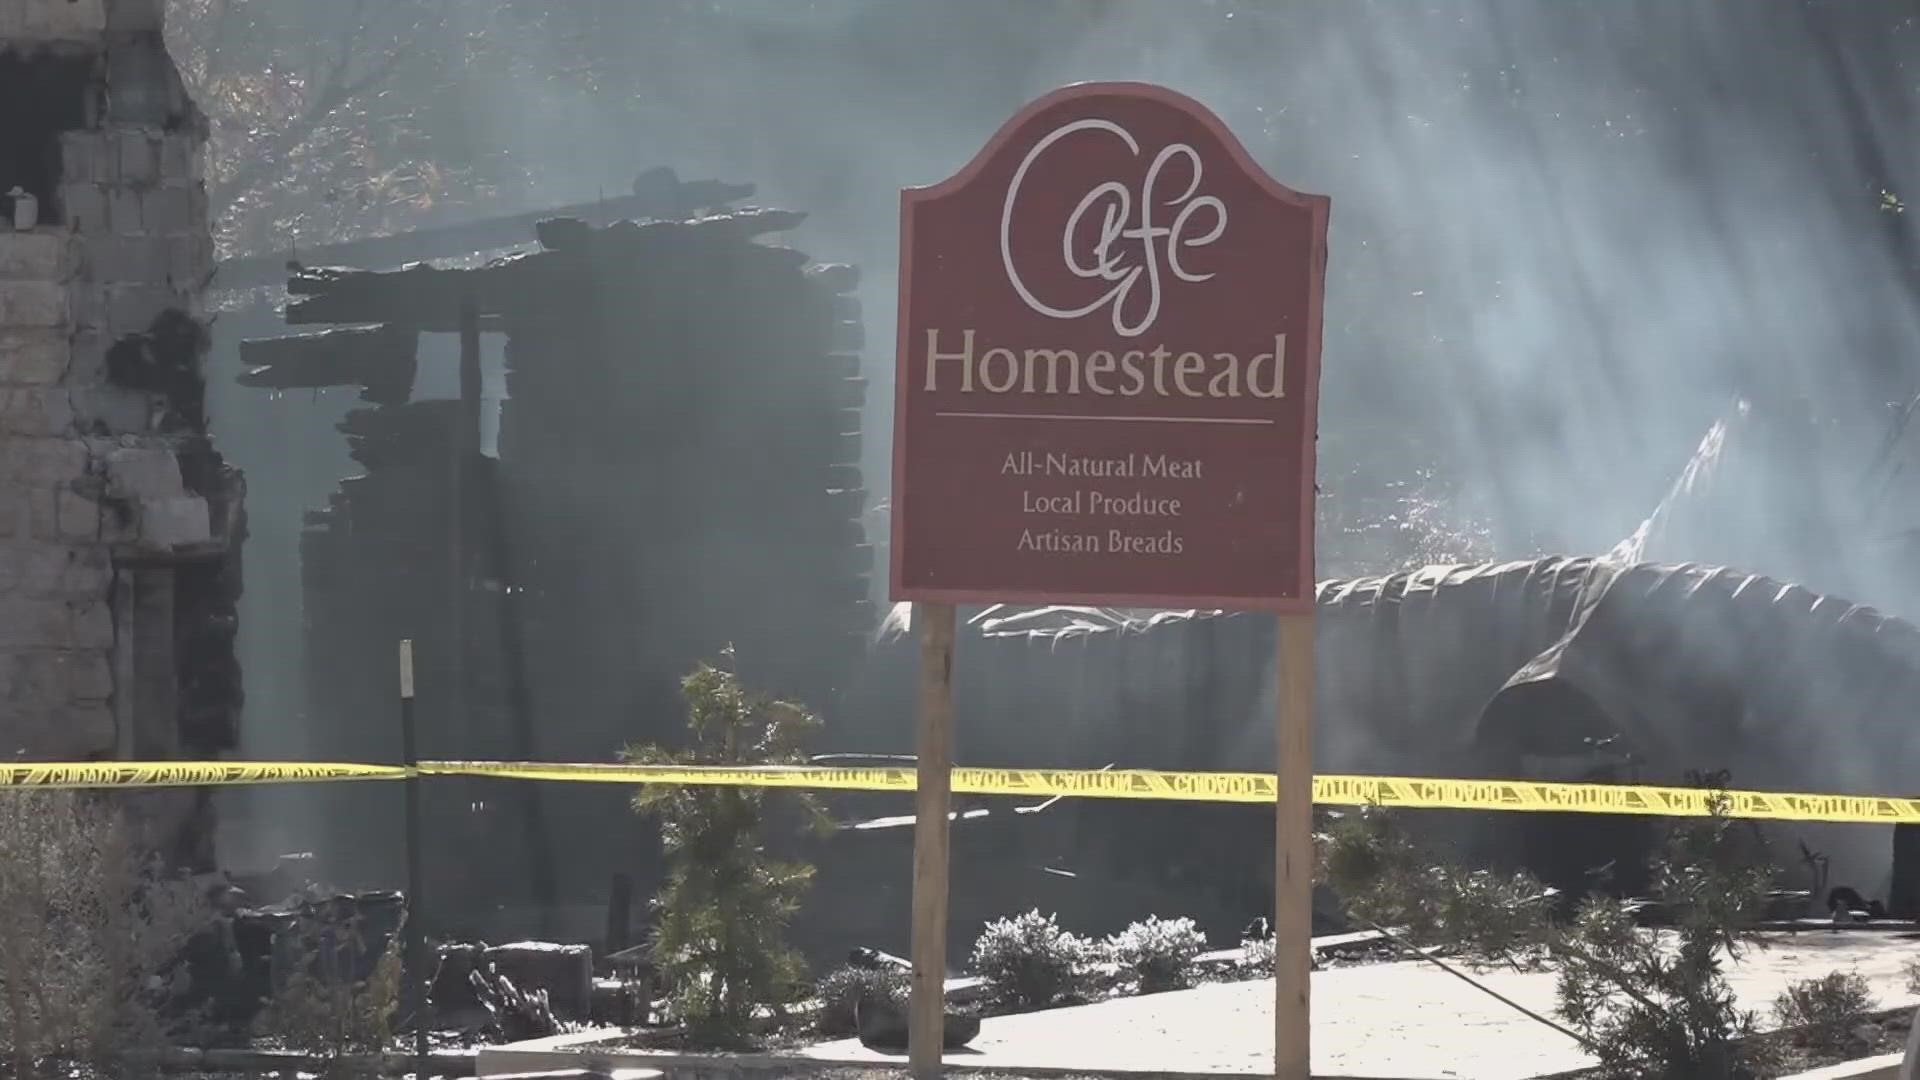 After suffering a devastating fire on December 23rd, Cafe Homestead held a two-night dinner for the community to raise funds for the new restaurant rebuild.